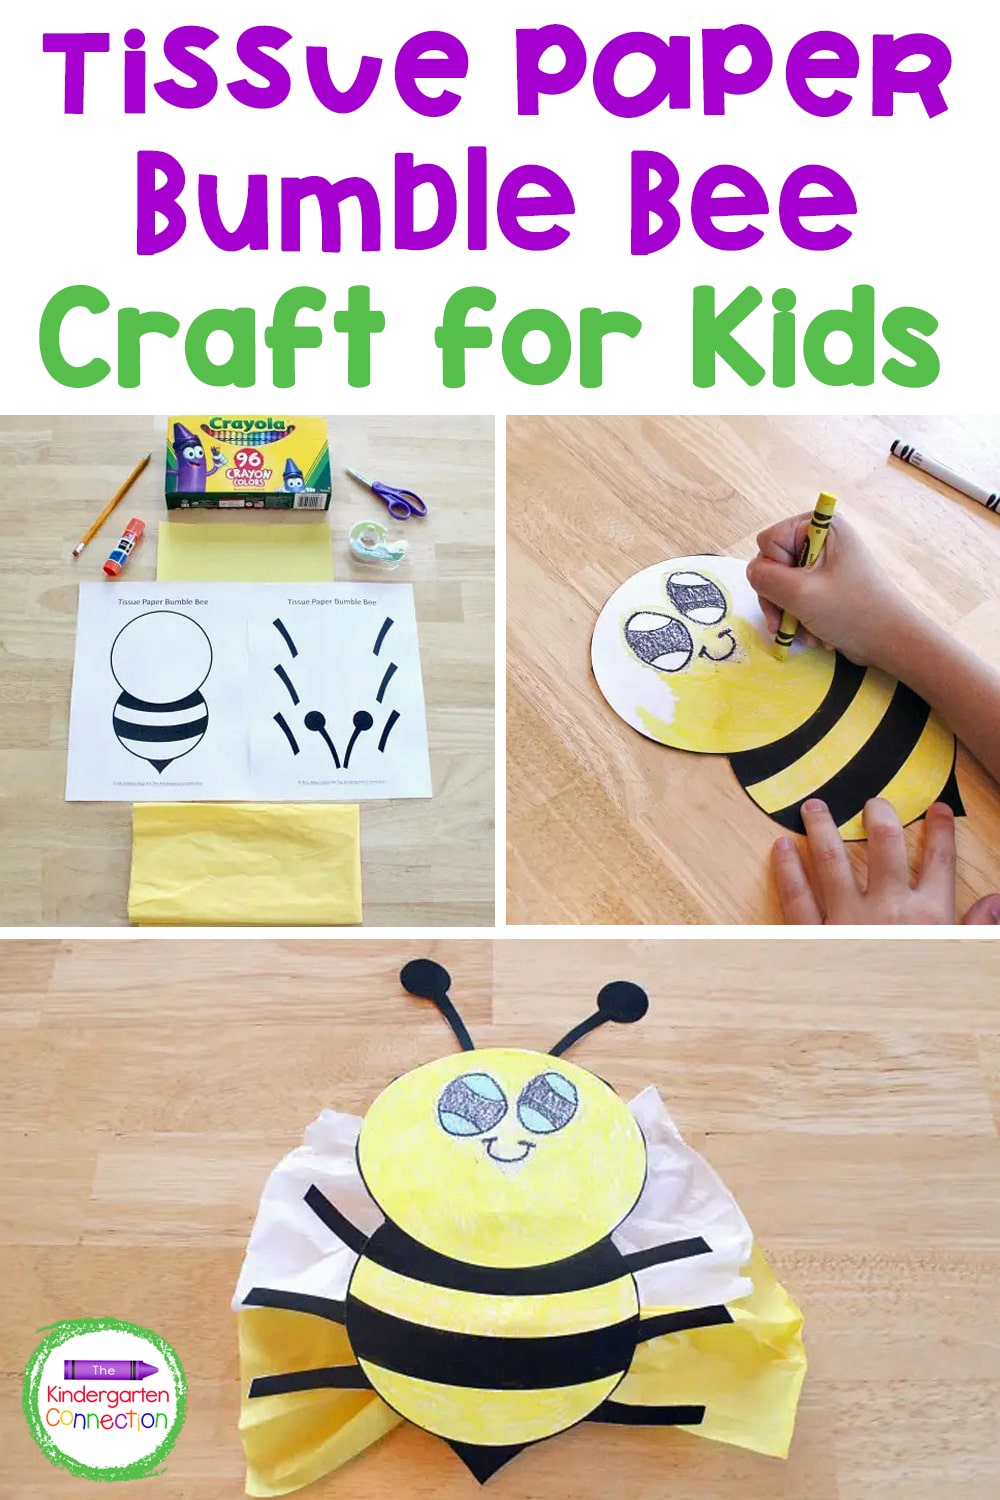 Tissue Paper Bumble Bee Craft